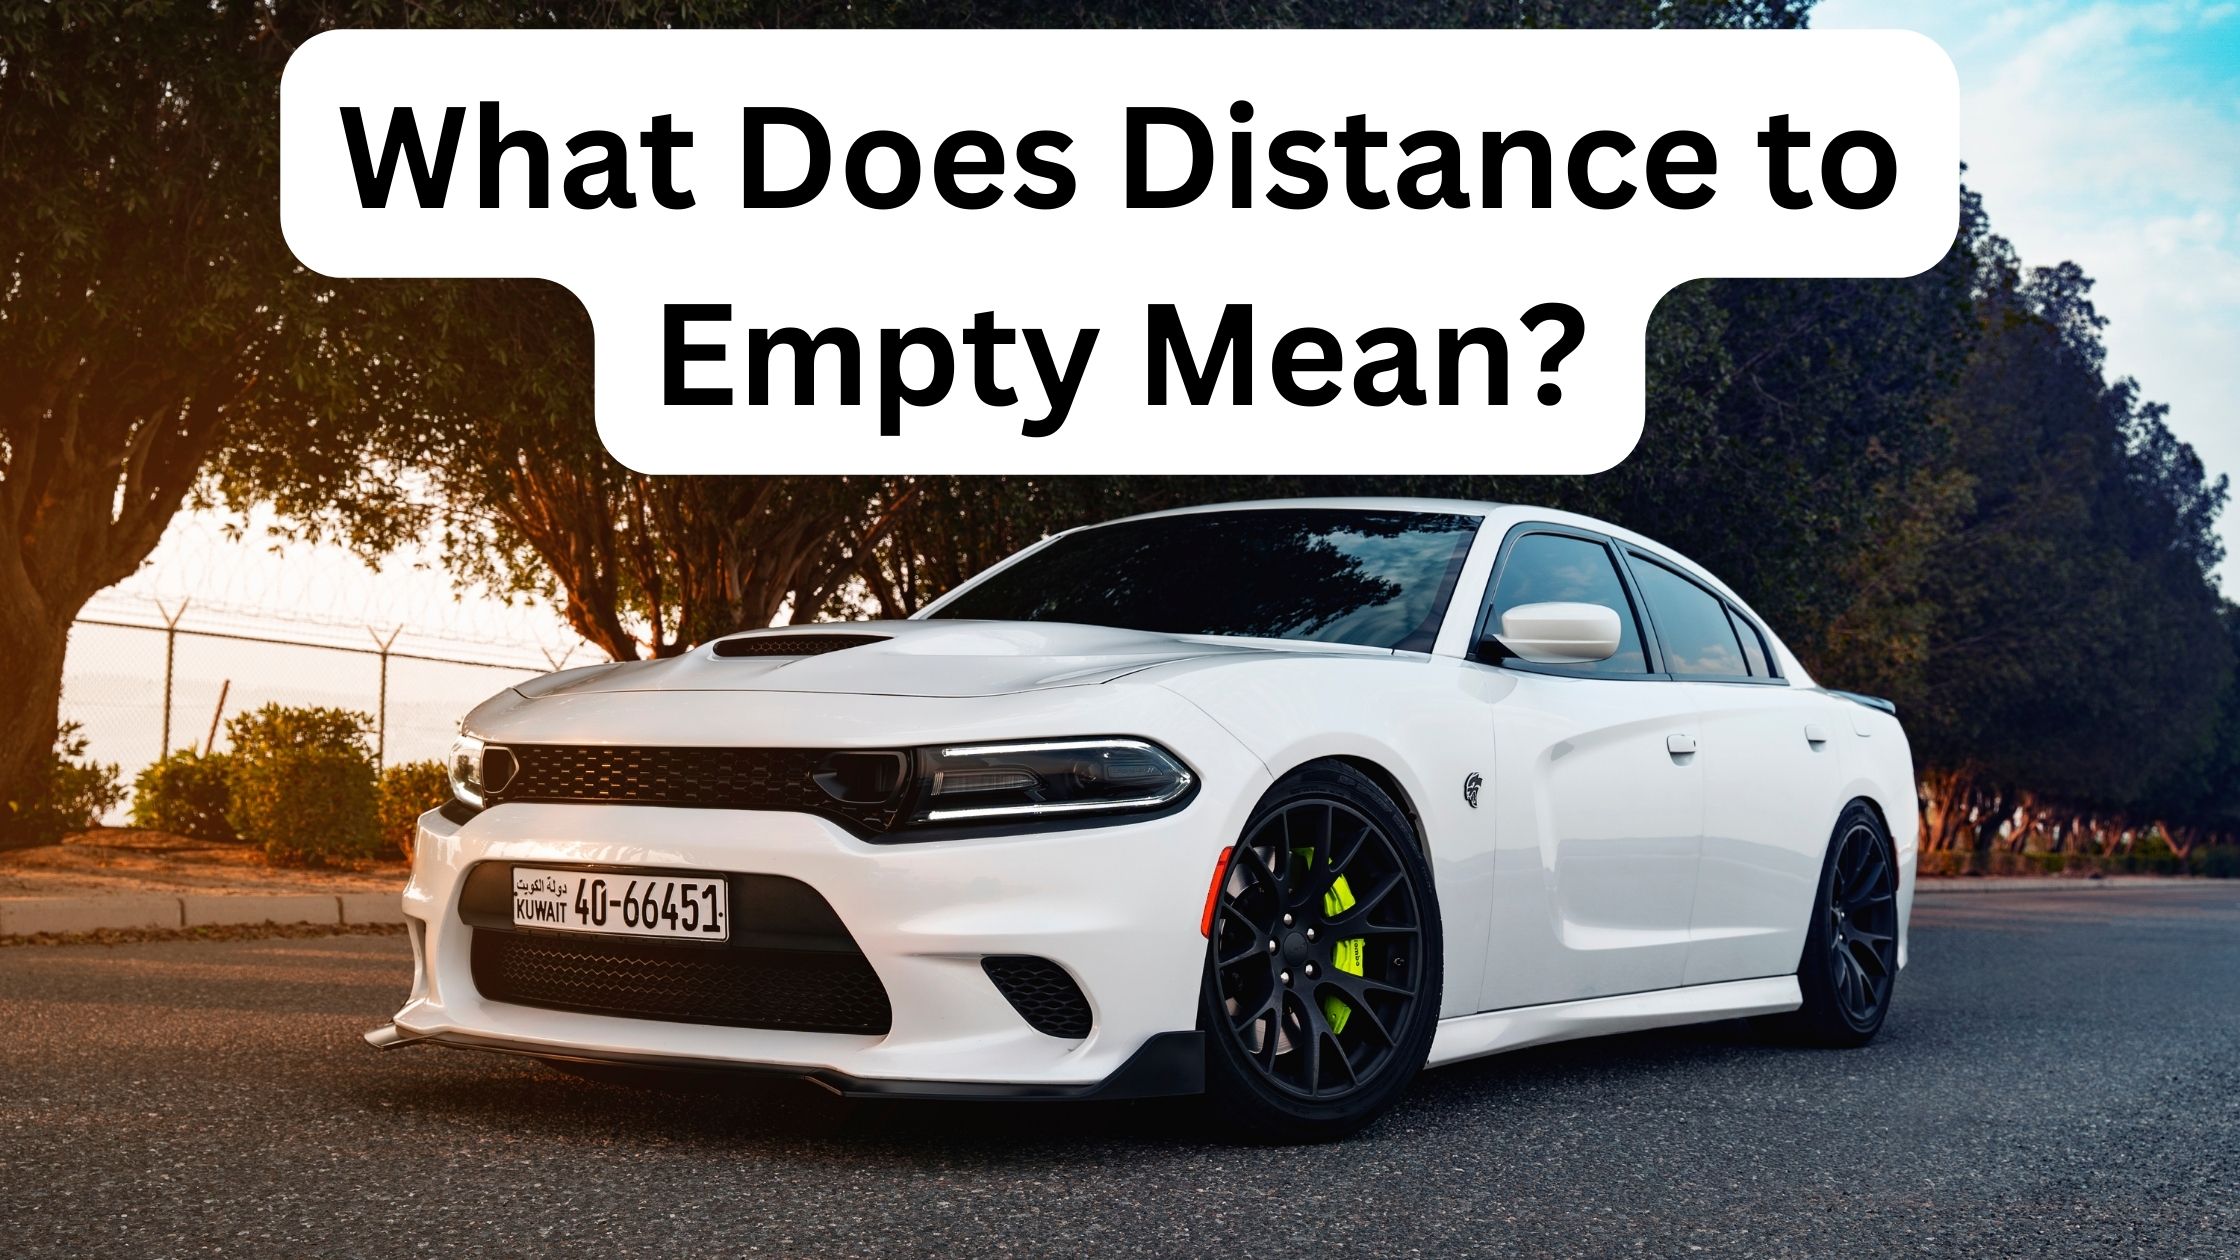 "Explore what DTE (Distance to Empty) means, how it works by monitoring fuel level and driving conditions, and its potential inaccuracies on modern vehicle dashboards."